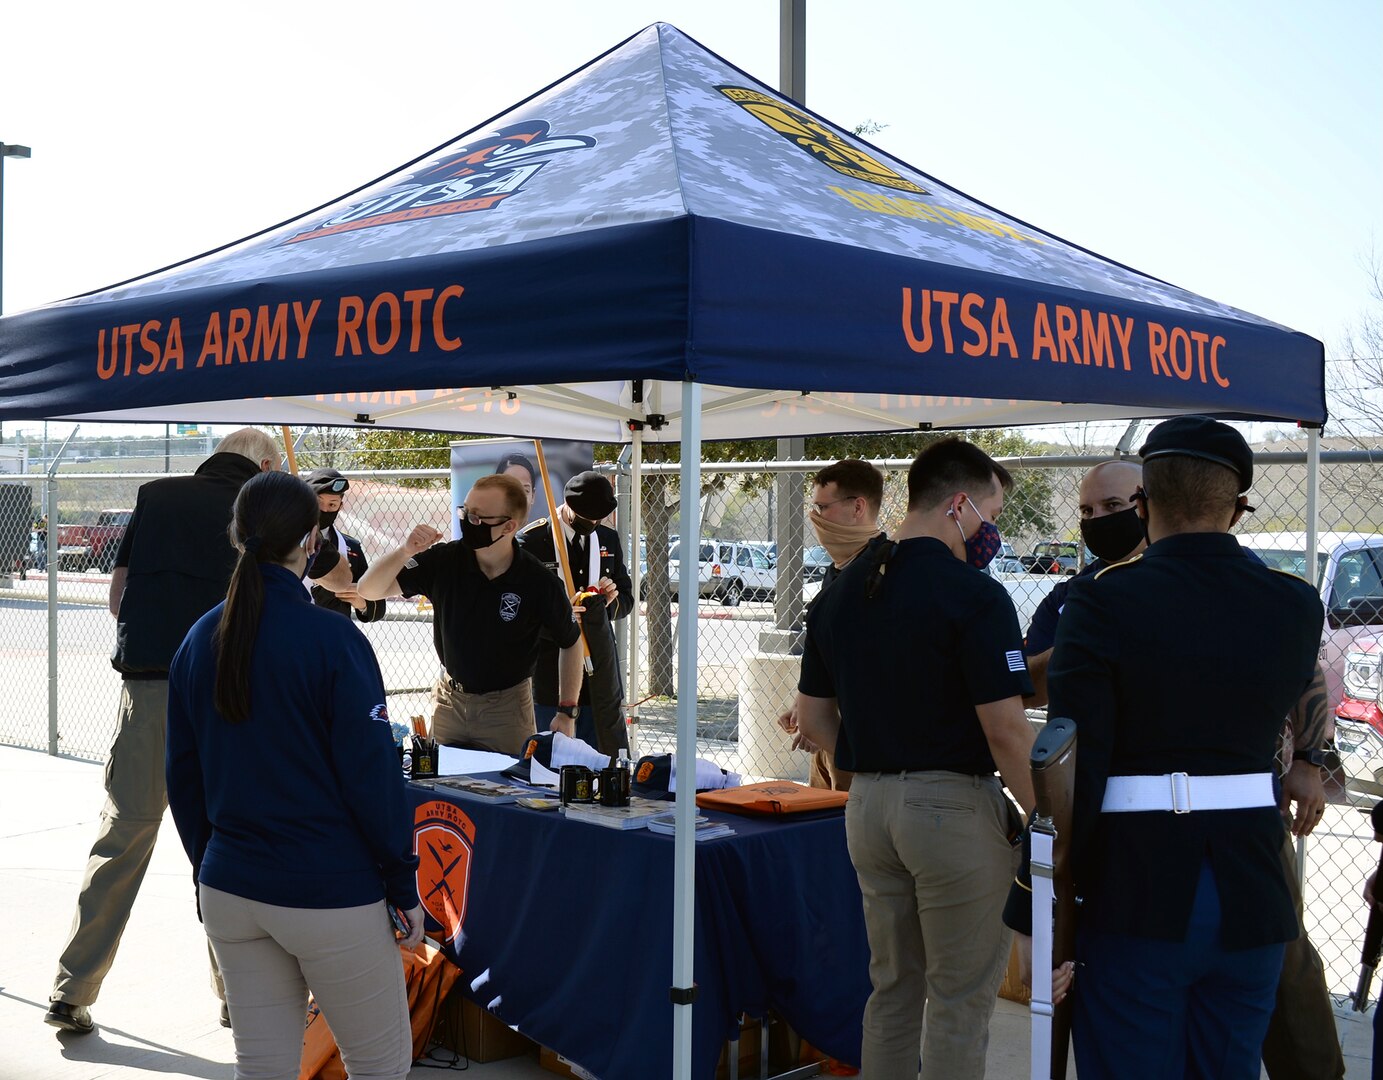 Prior to the kickoff of the San Antonio Sports All-Star Football Game, cadets from The University of Texas at San Antonio Army ROTC 5th Brigade, U.S. Army Cadet Command, teamed up with the U.S. Army Recruiting Battalion San Antonio to speak with spectators as they entered Heroes Stadium in San Antonio Jan. 30.